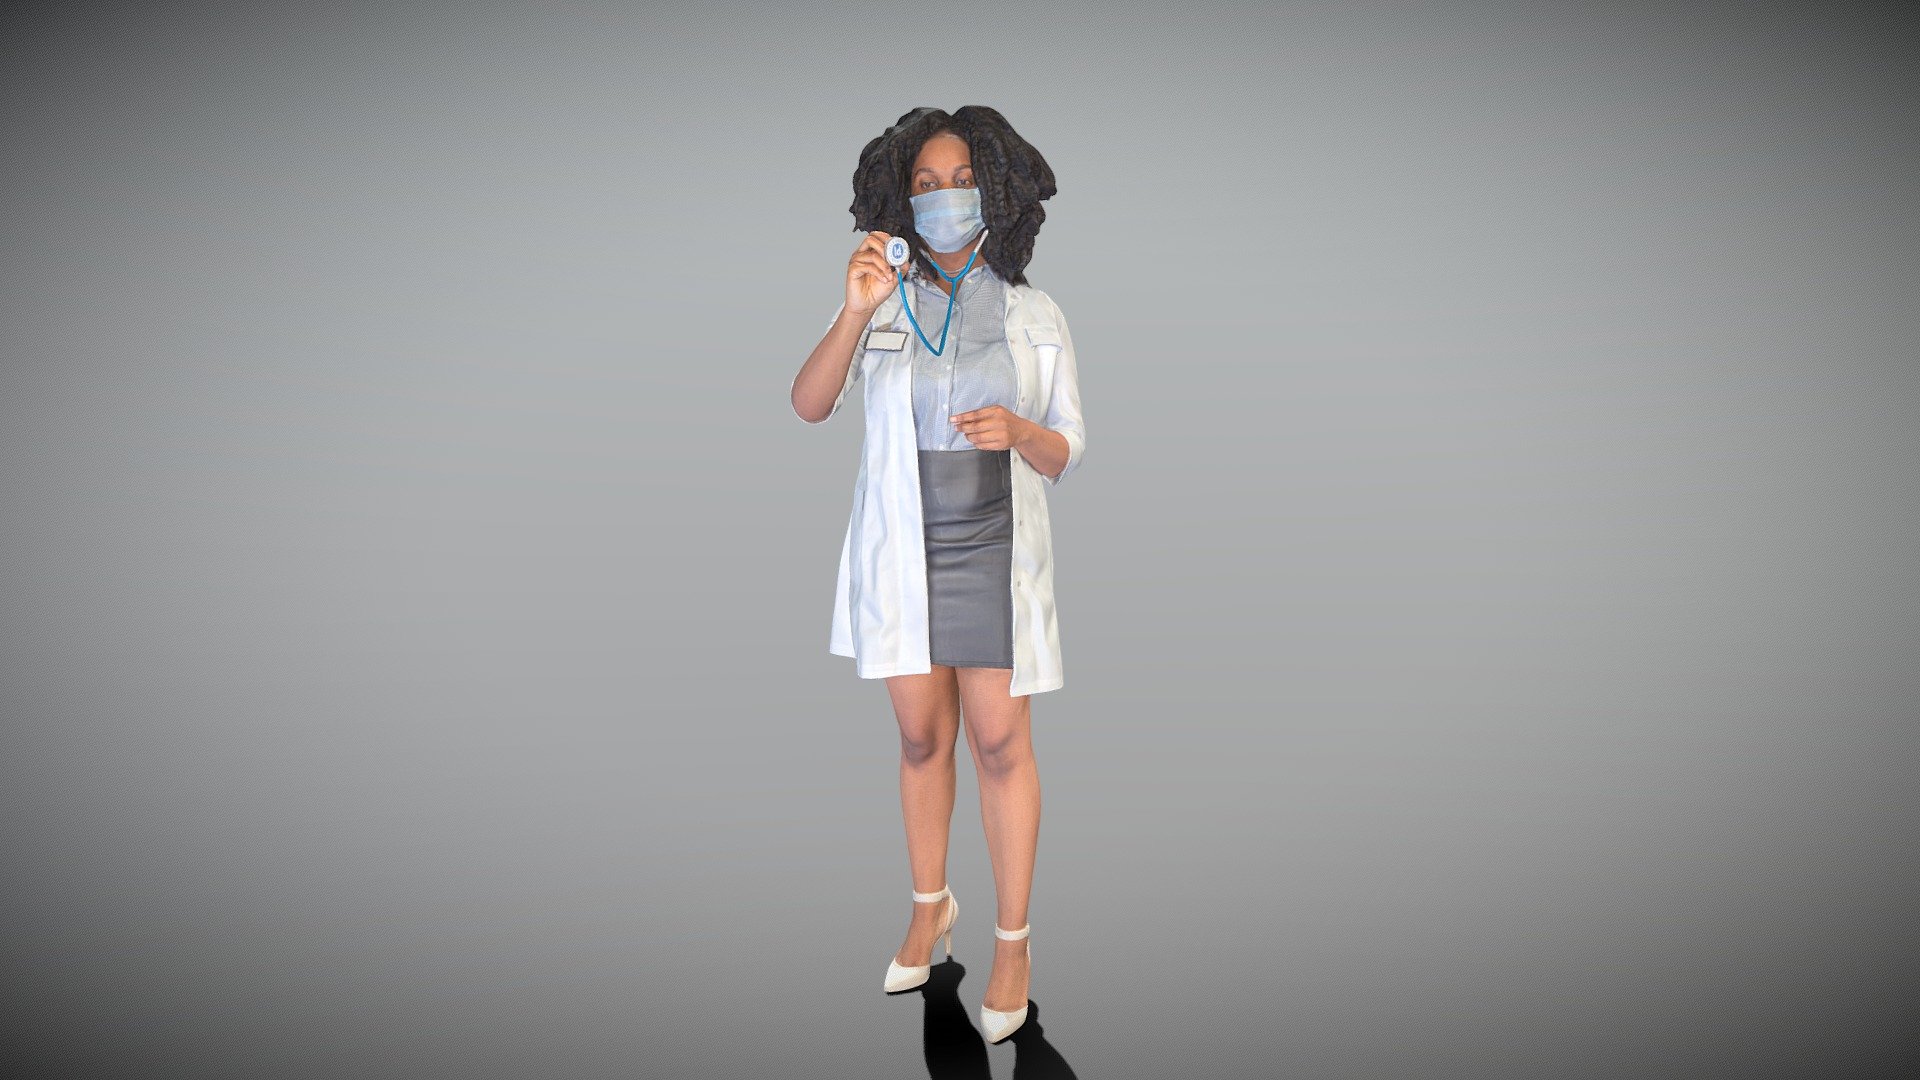 This is a true human size and detailed model of a beautiful young woman of African appearance dressed in a medical uniform. The model is captured in typical professional pose to perfectly match a variety of architectural and product visualizations, be used as a background or mid-sized character in advert banners, professional products/devices presentations, educational tutorials, VR/AR content, etc.

Technical specifications:




digital double 3d scan model

150k &amp; 30k triangles | double triangulated

high-poly model (.ztl tool with 5 subdivisions) clean and retopologized automatically via ZRemesher

sufficiently clean

PBR textures 8K resolution: Diffuse, Normal, Specular maps

non-overlapping UV map

no extra plugins are required for this model

Download package includes a Cinema 4D project file with Redshift shader, OBJ, FBX, STL files, which are applicable for 3ds Max, Maya, Unreal Engine, Unity, Blender, etc.

3D EVERYTHING

Stand with Ukraine! - Female doctor in medical attire 401 - Buy Royalty Free 3D model by deep3dstudio 3d model